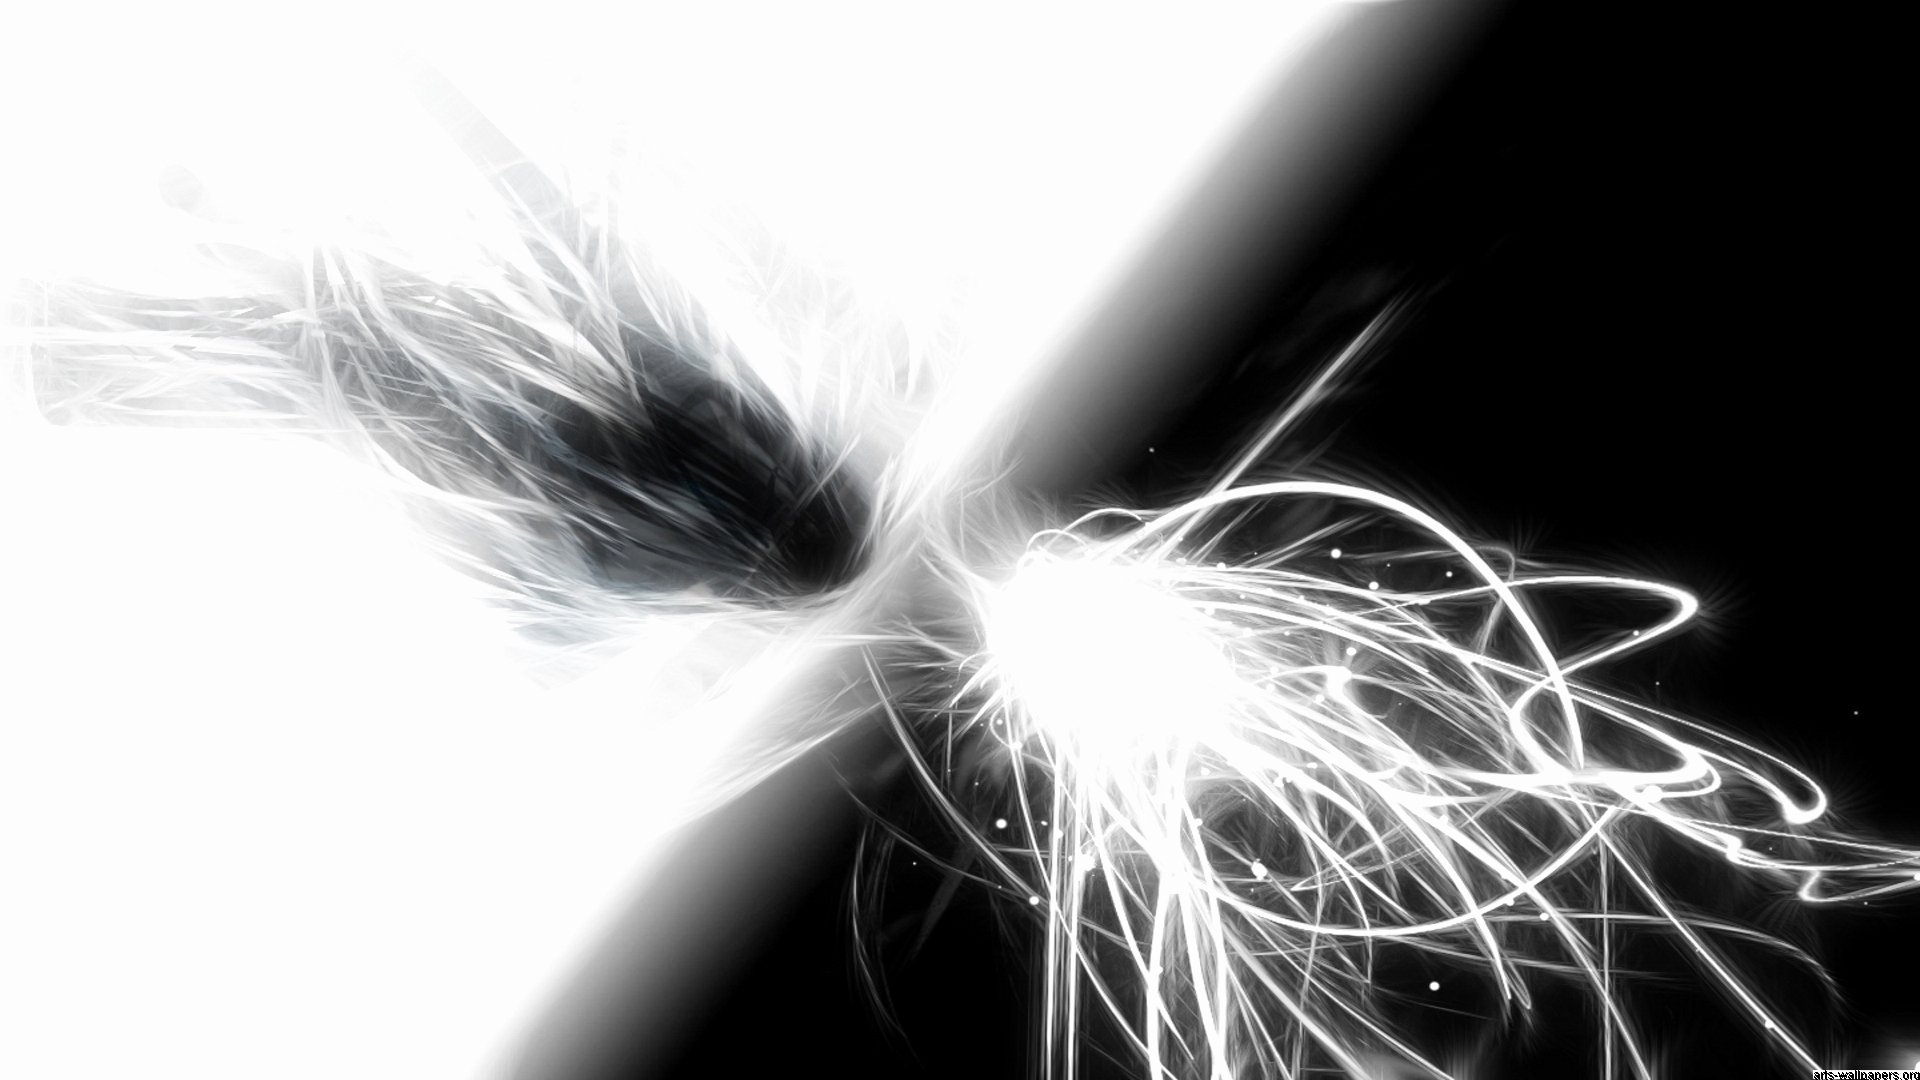 Black and White Abstract Pictures Best Of Black and White Abstract Drawings 8 Background